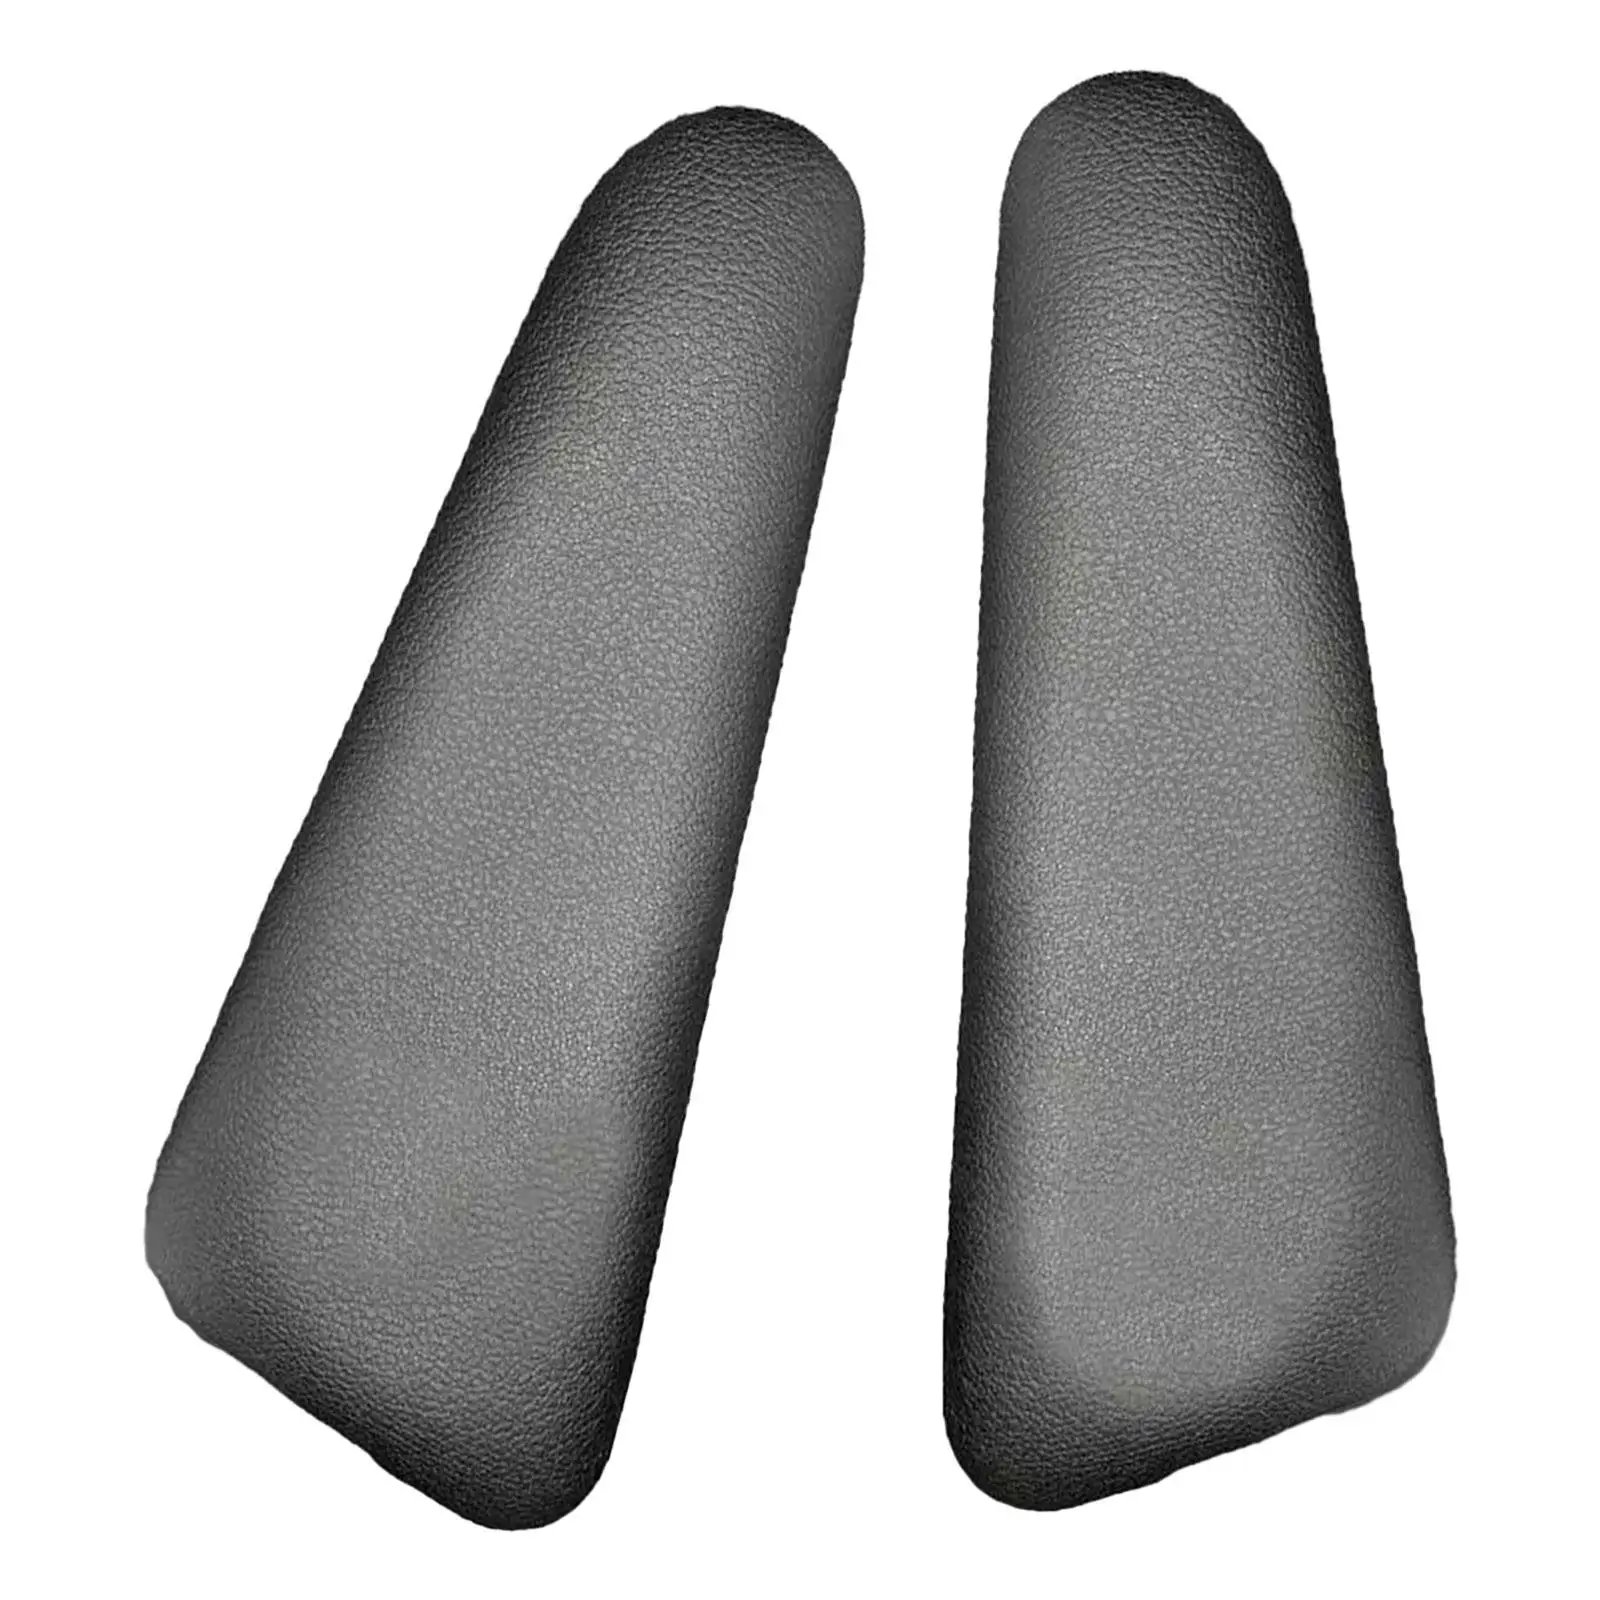 2x Car Knee Pad Cushions Center Console Automotive Knee Support Protective Pad